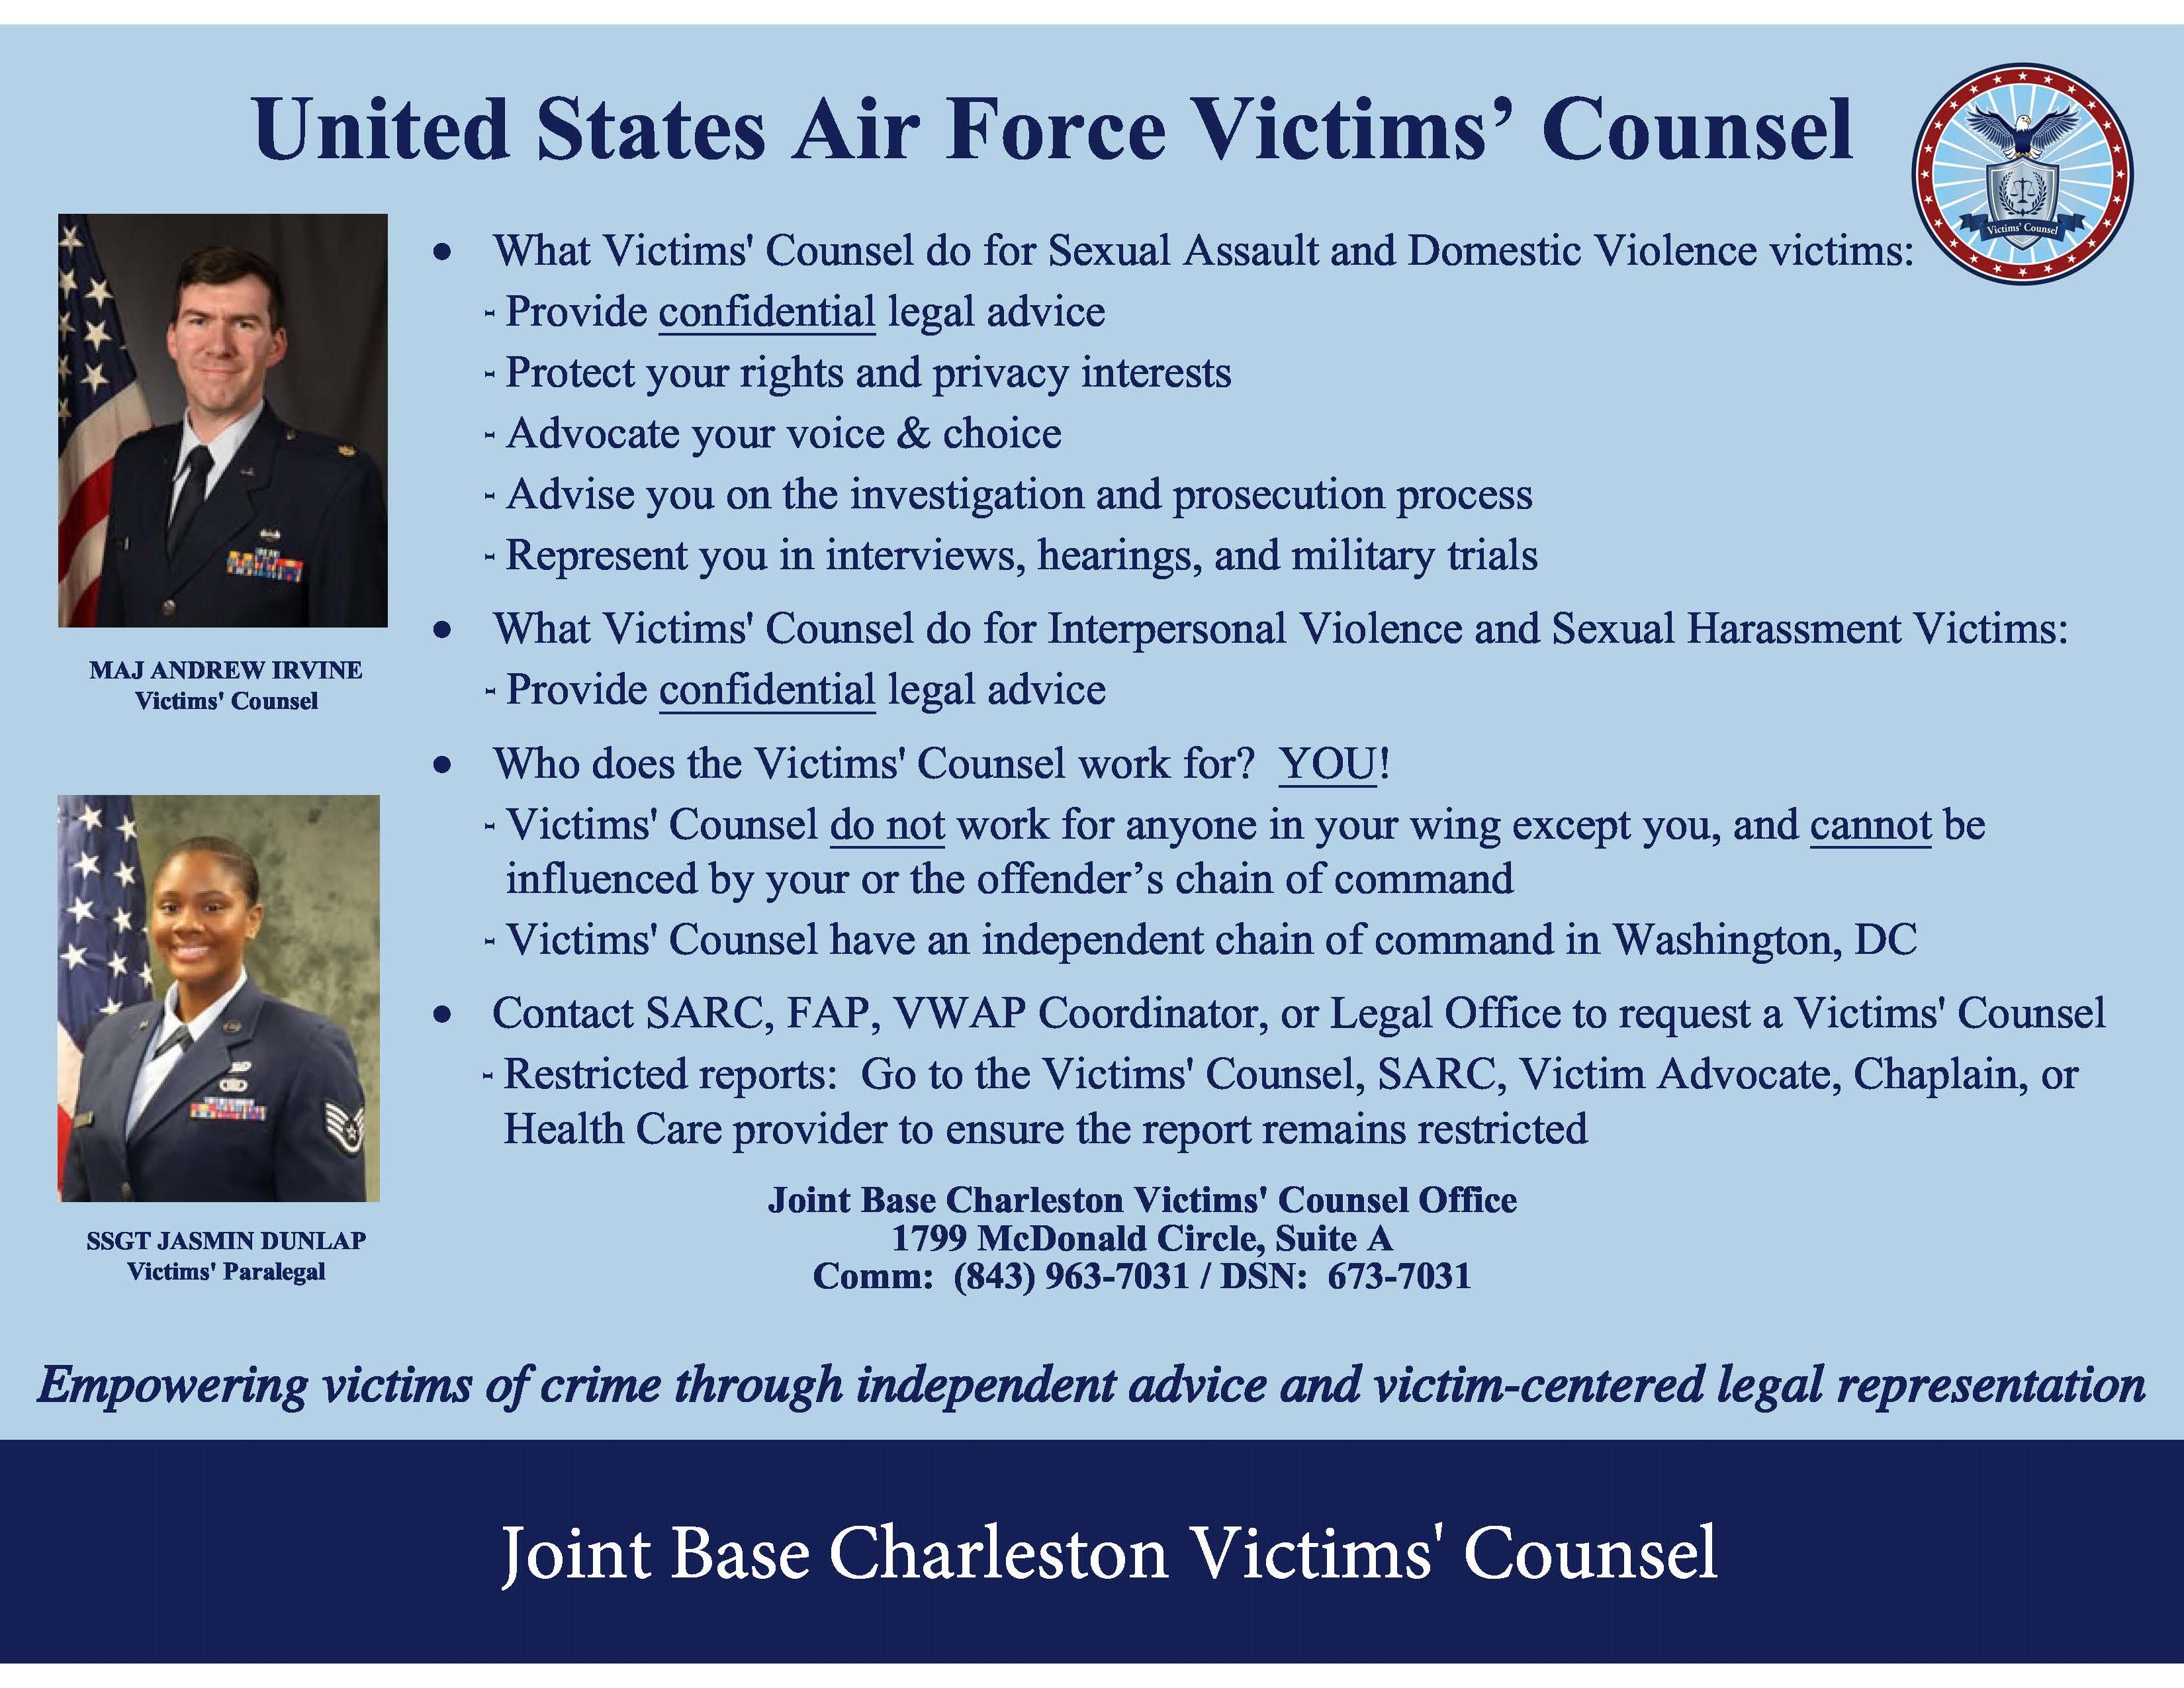 A poster for the USAF Victims' Counsel